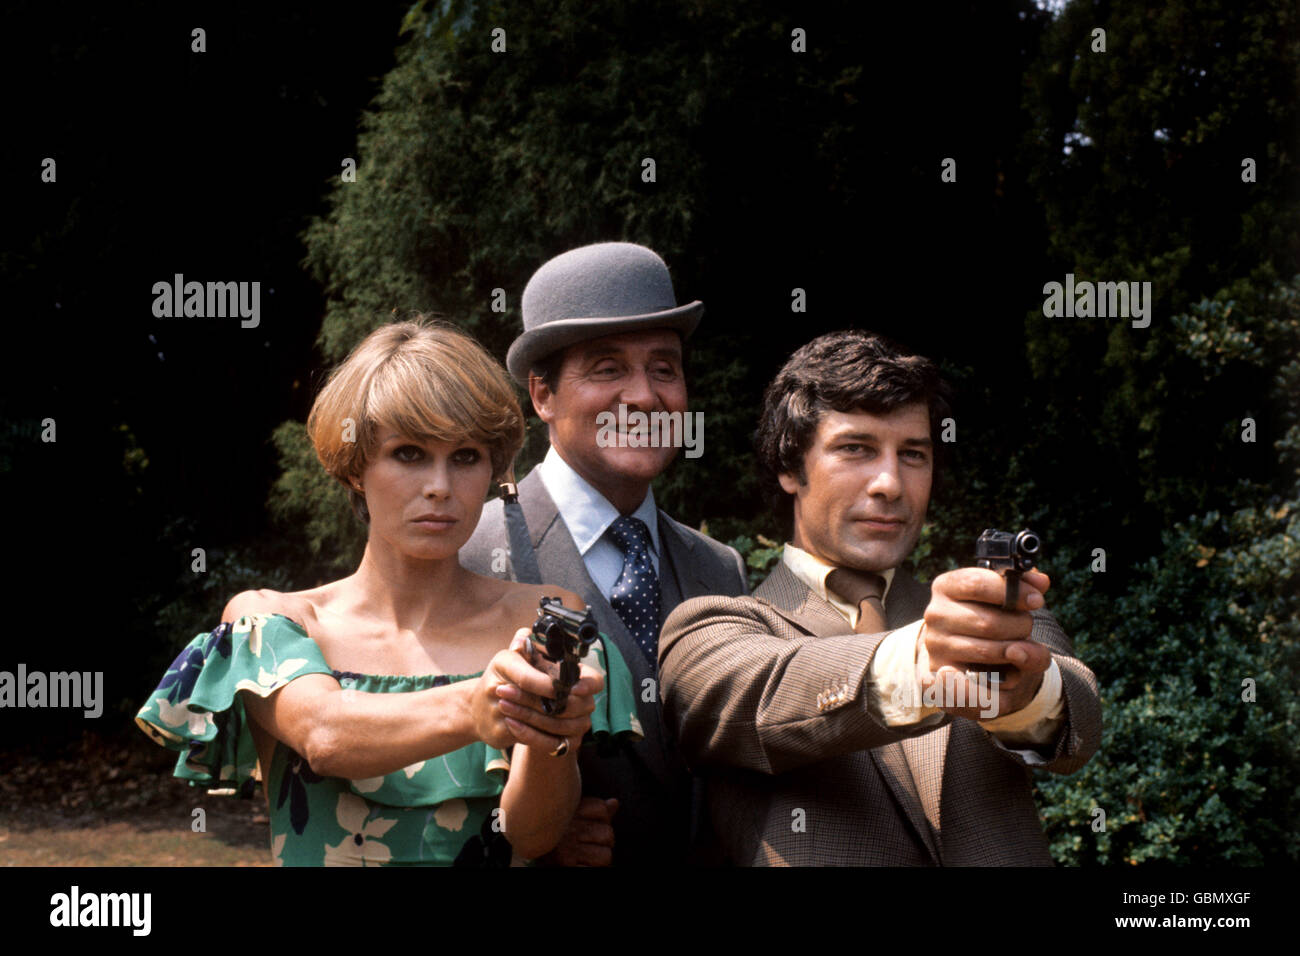 (L-R) Joanna Lumley, who plays Purdey, Patrick MacNee, who plays John Steed, and Gareth Hunt, who plays Mike Gambit, pictured during filming at Pinewood Studios Stock Photo